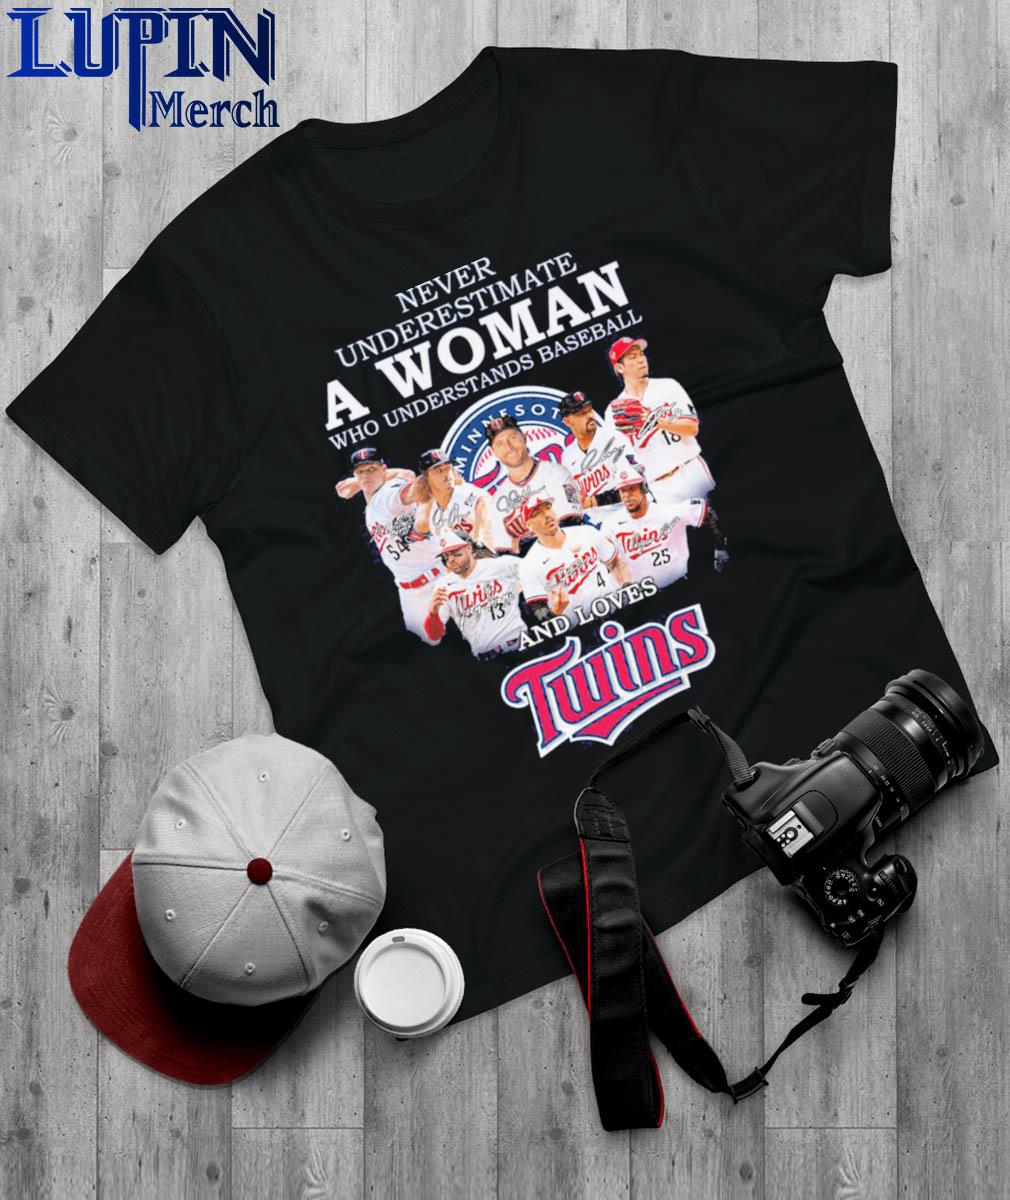 Product never underestimate a woman who understands baseball and